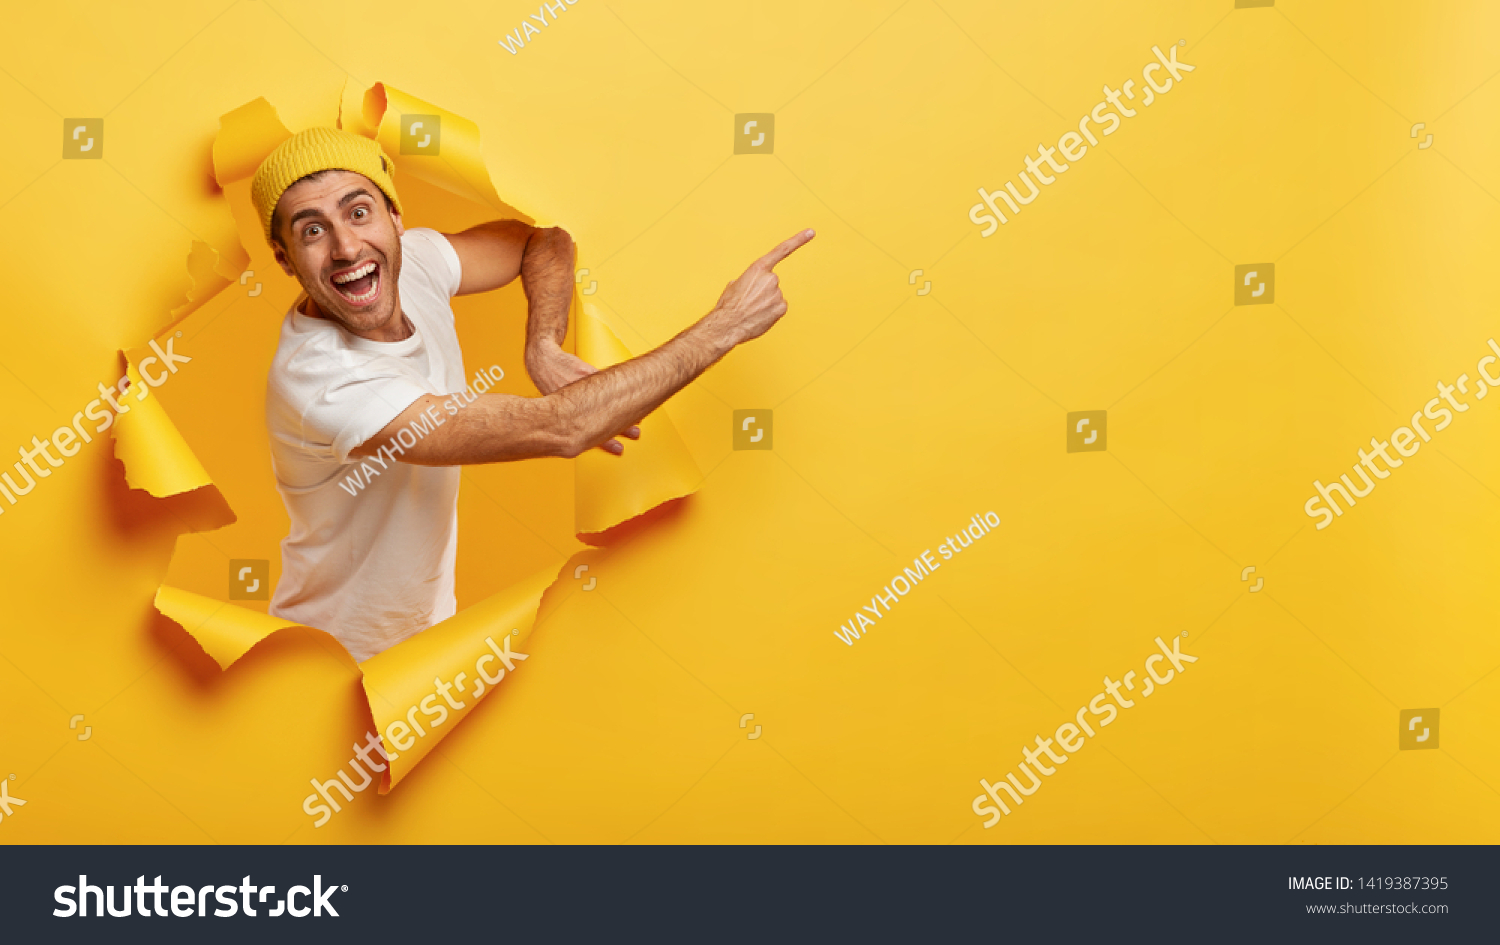 Confident happy man in casual white t shirt, points at upper right corner, invites going in this direction, demonstrates welcoming gesture, stands in torn paper hole, says you must see product #1419387395